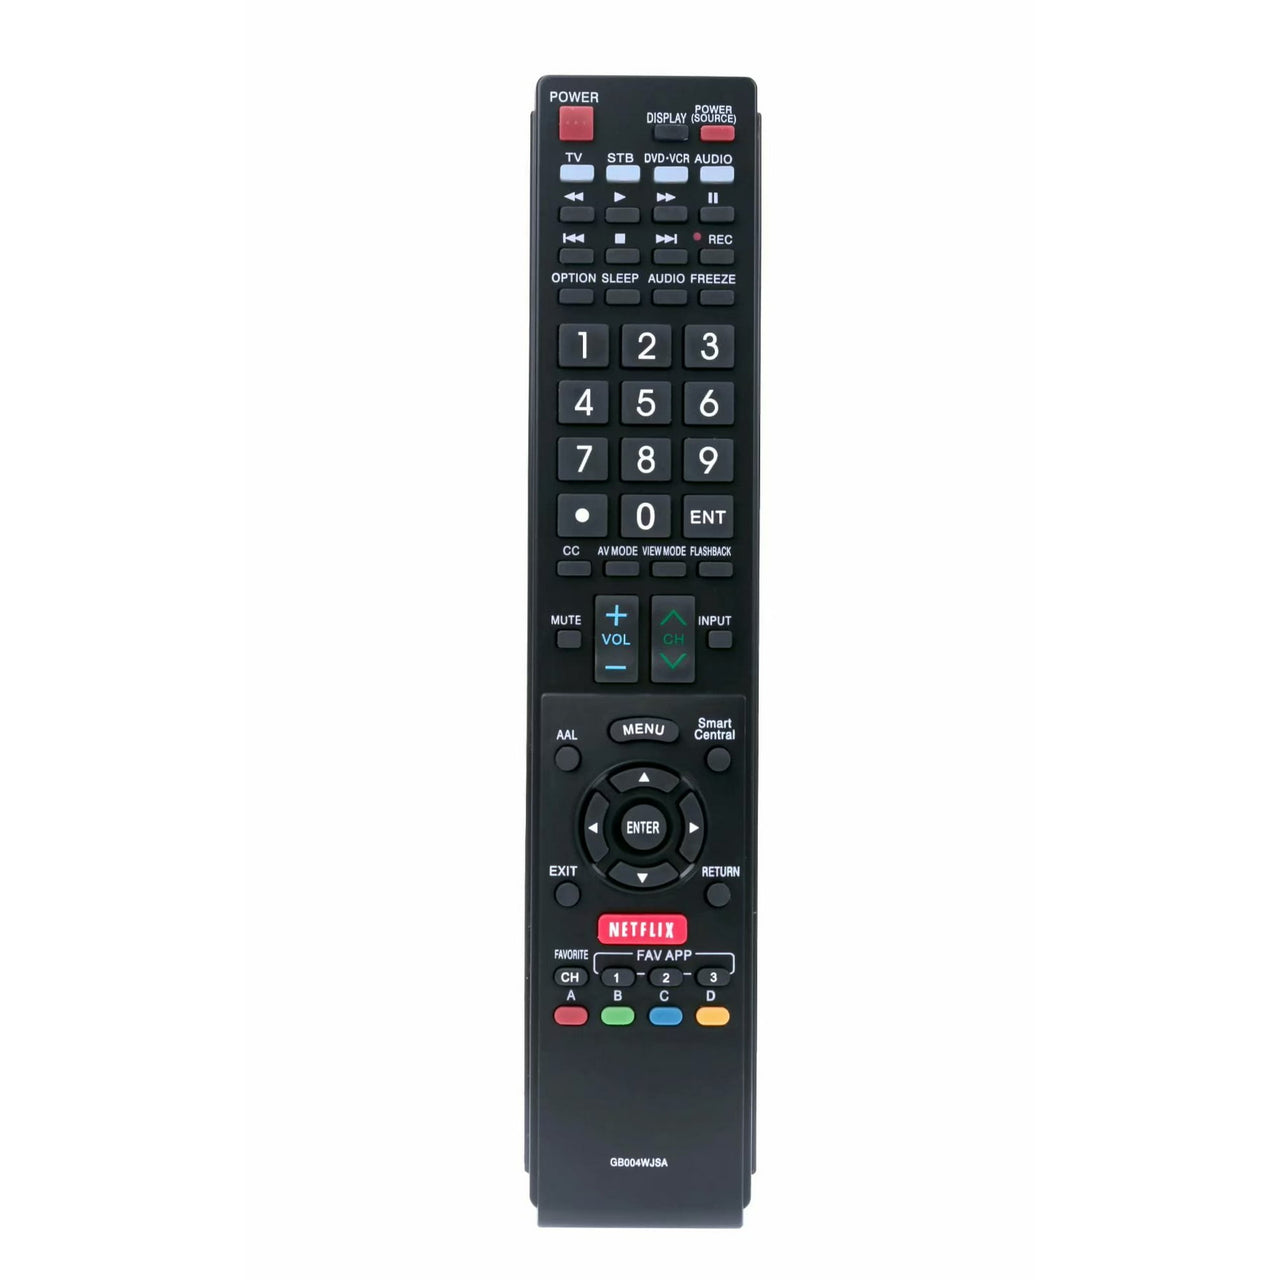 GB004WJSA Replacement Remote for Sharp Televisions